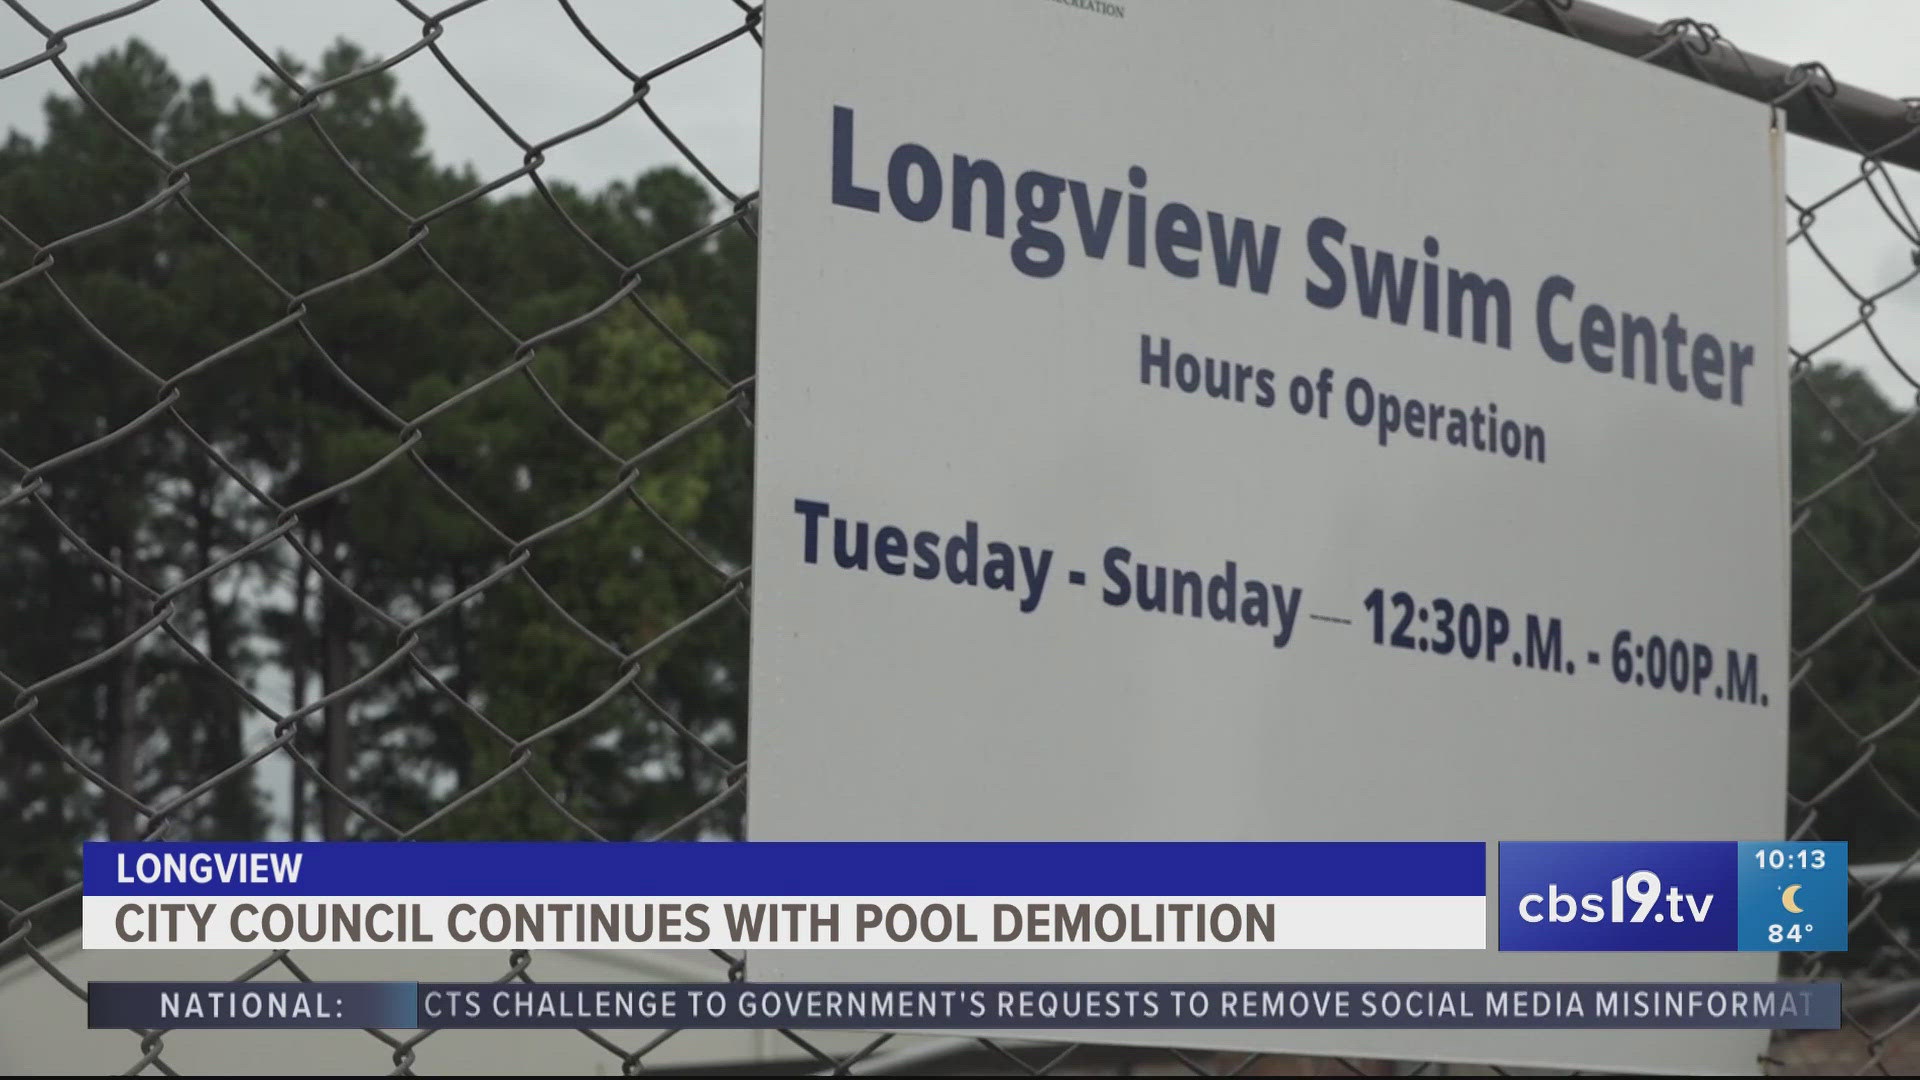 As it stands today, the Longview Swim Center is set to be demolished.